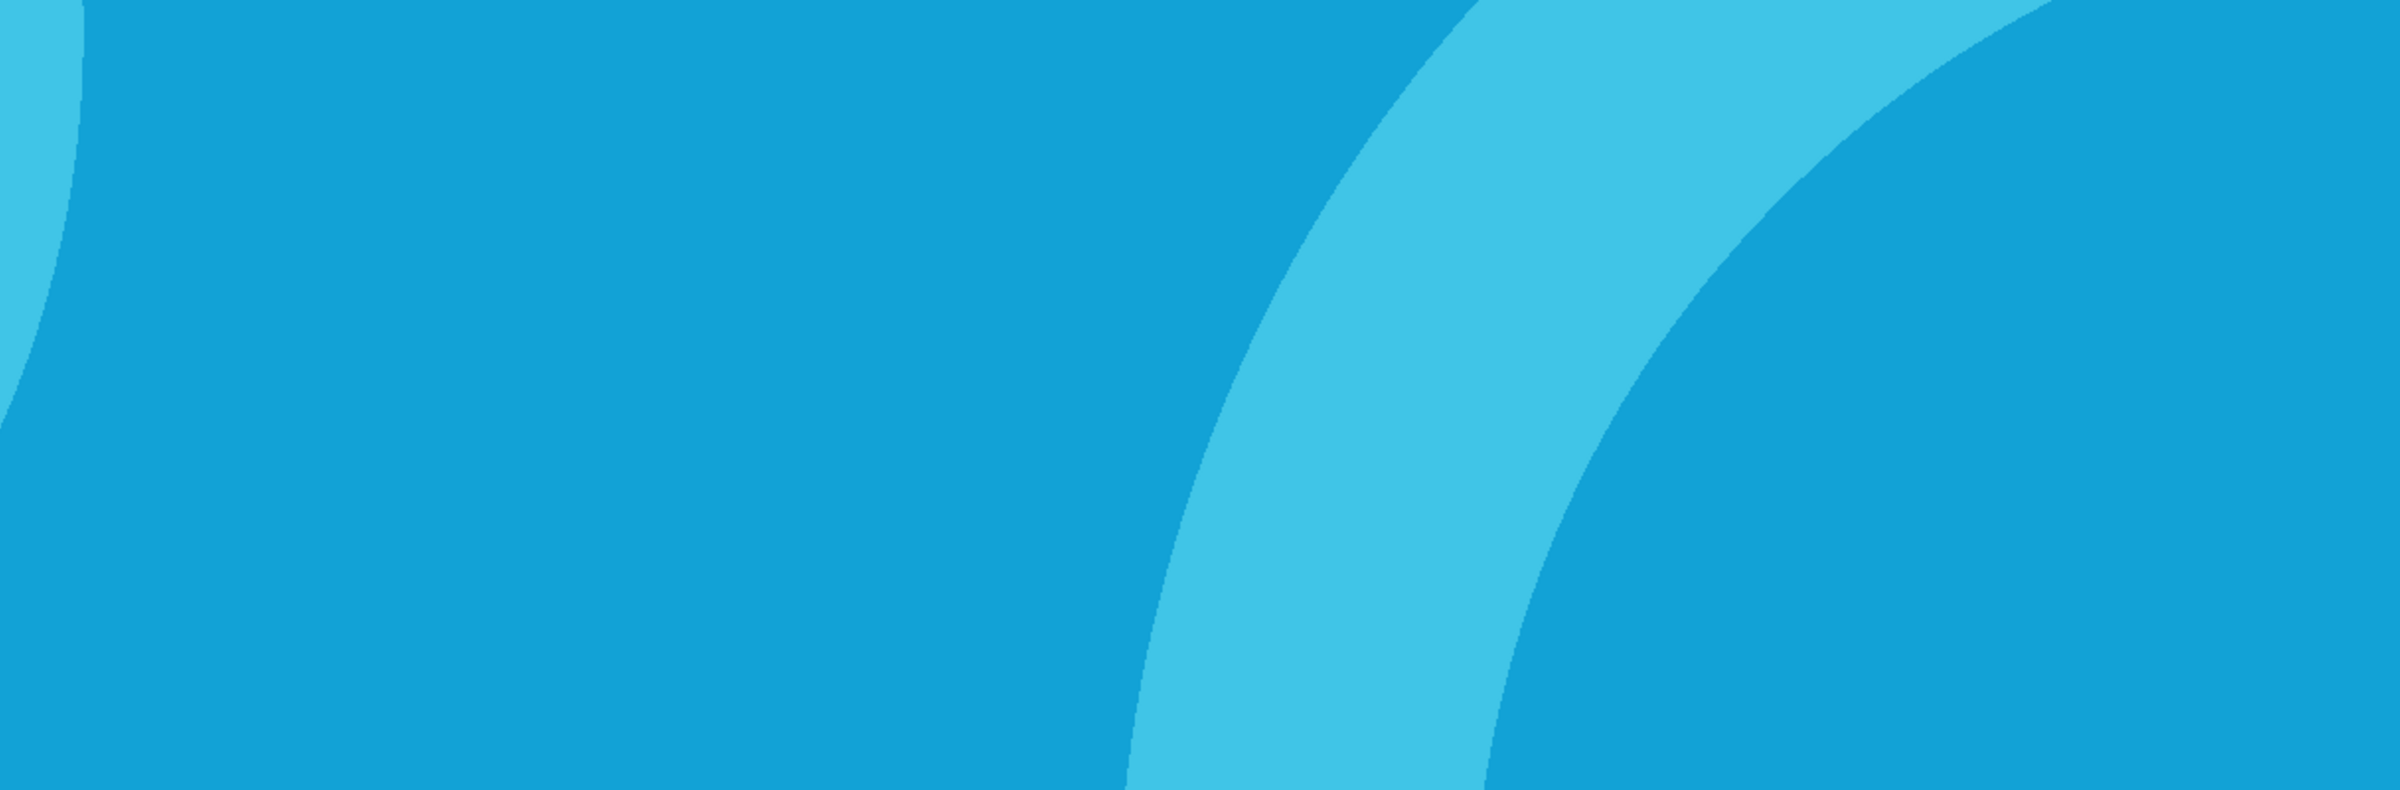 Light blue page banner